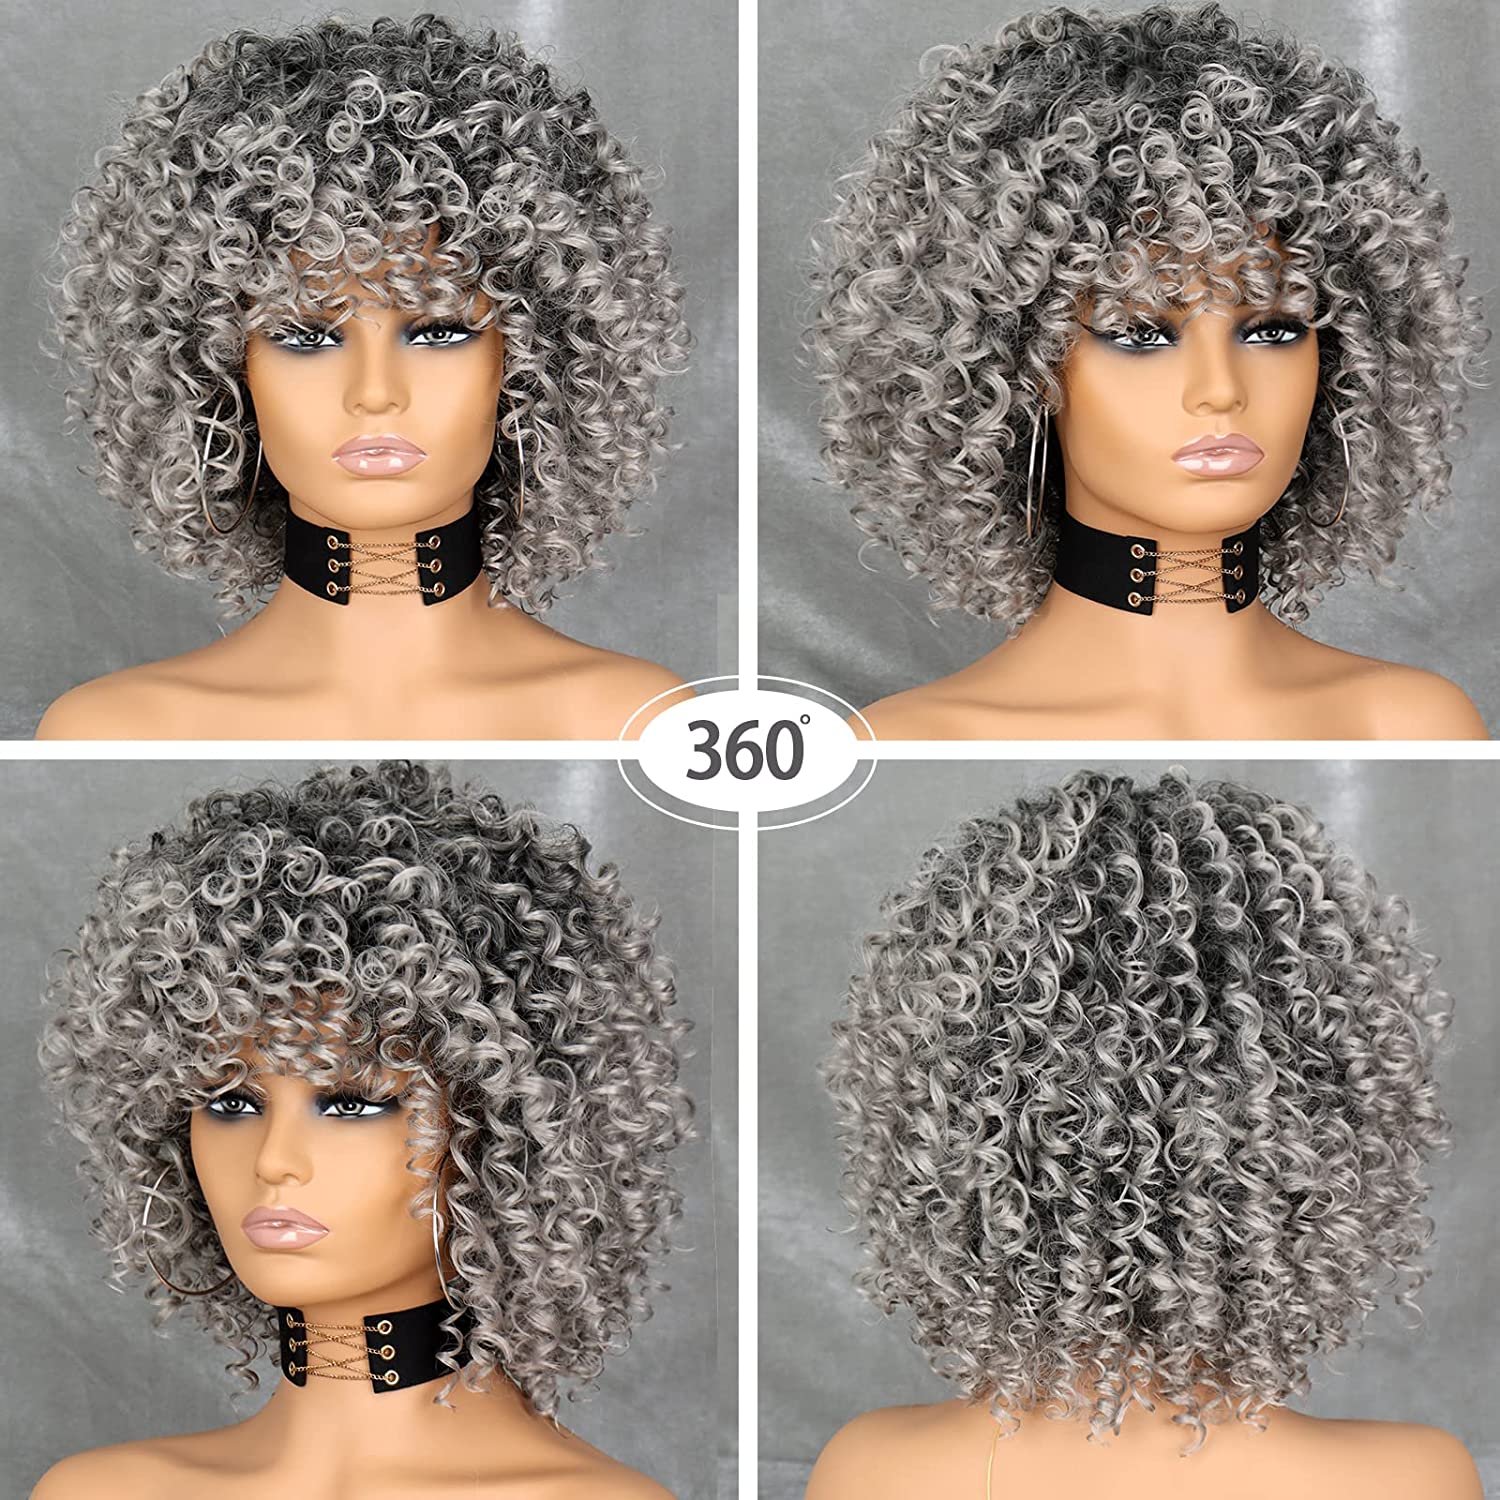 Curly Afro Grey Wigs for Black Women, Short Grey Curly Afro Wig with Bangs, Synthetic Omber Gray Curly Full Wig 14 inch